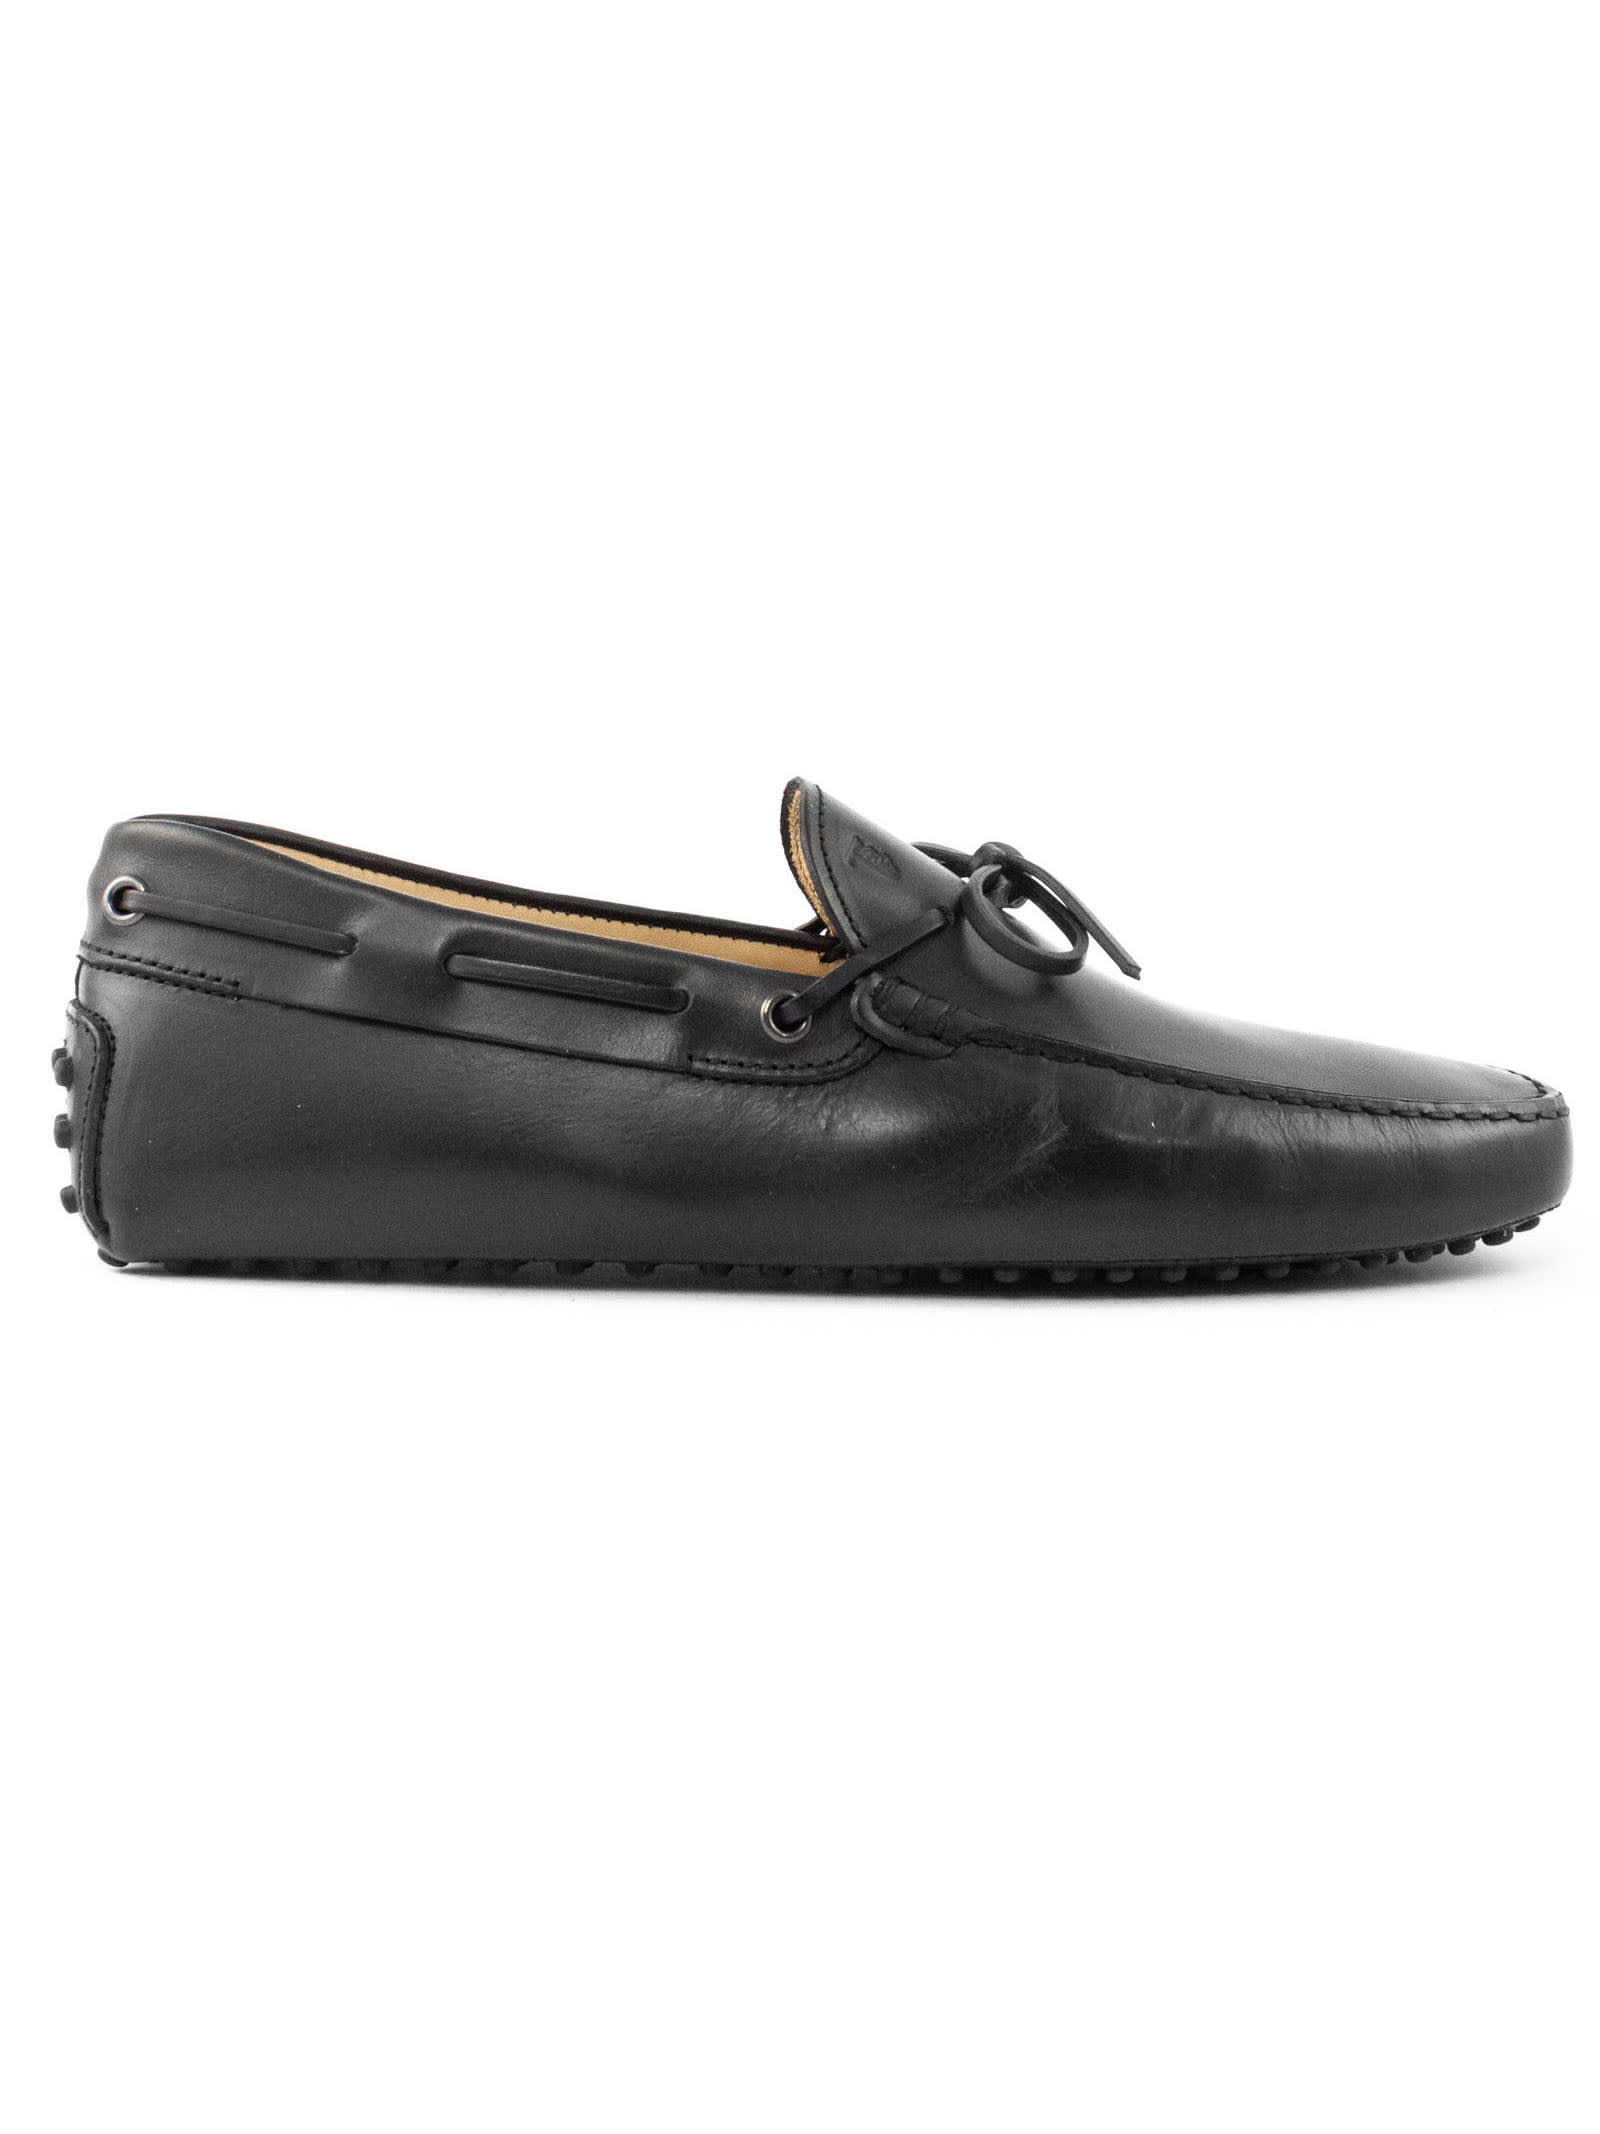 Tods Black Gommino Driving Shoes